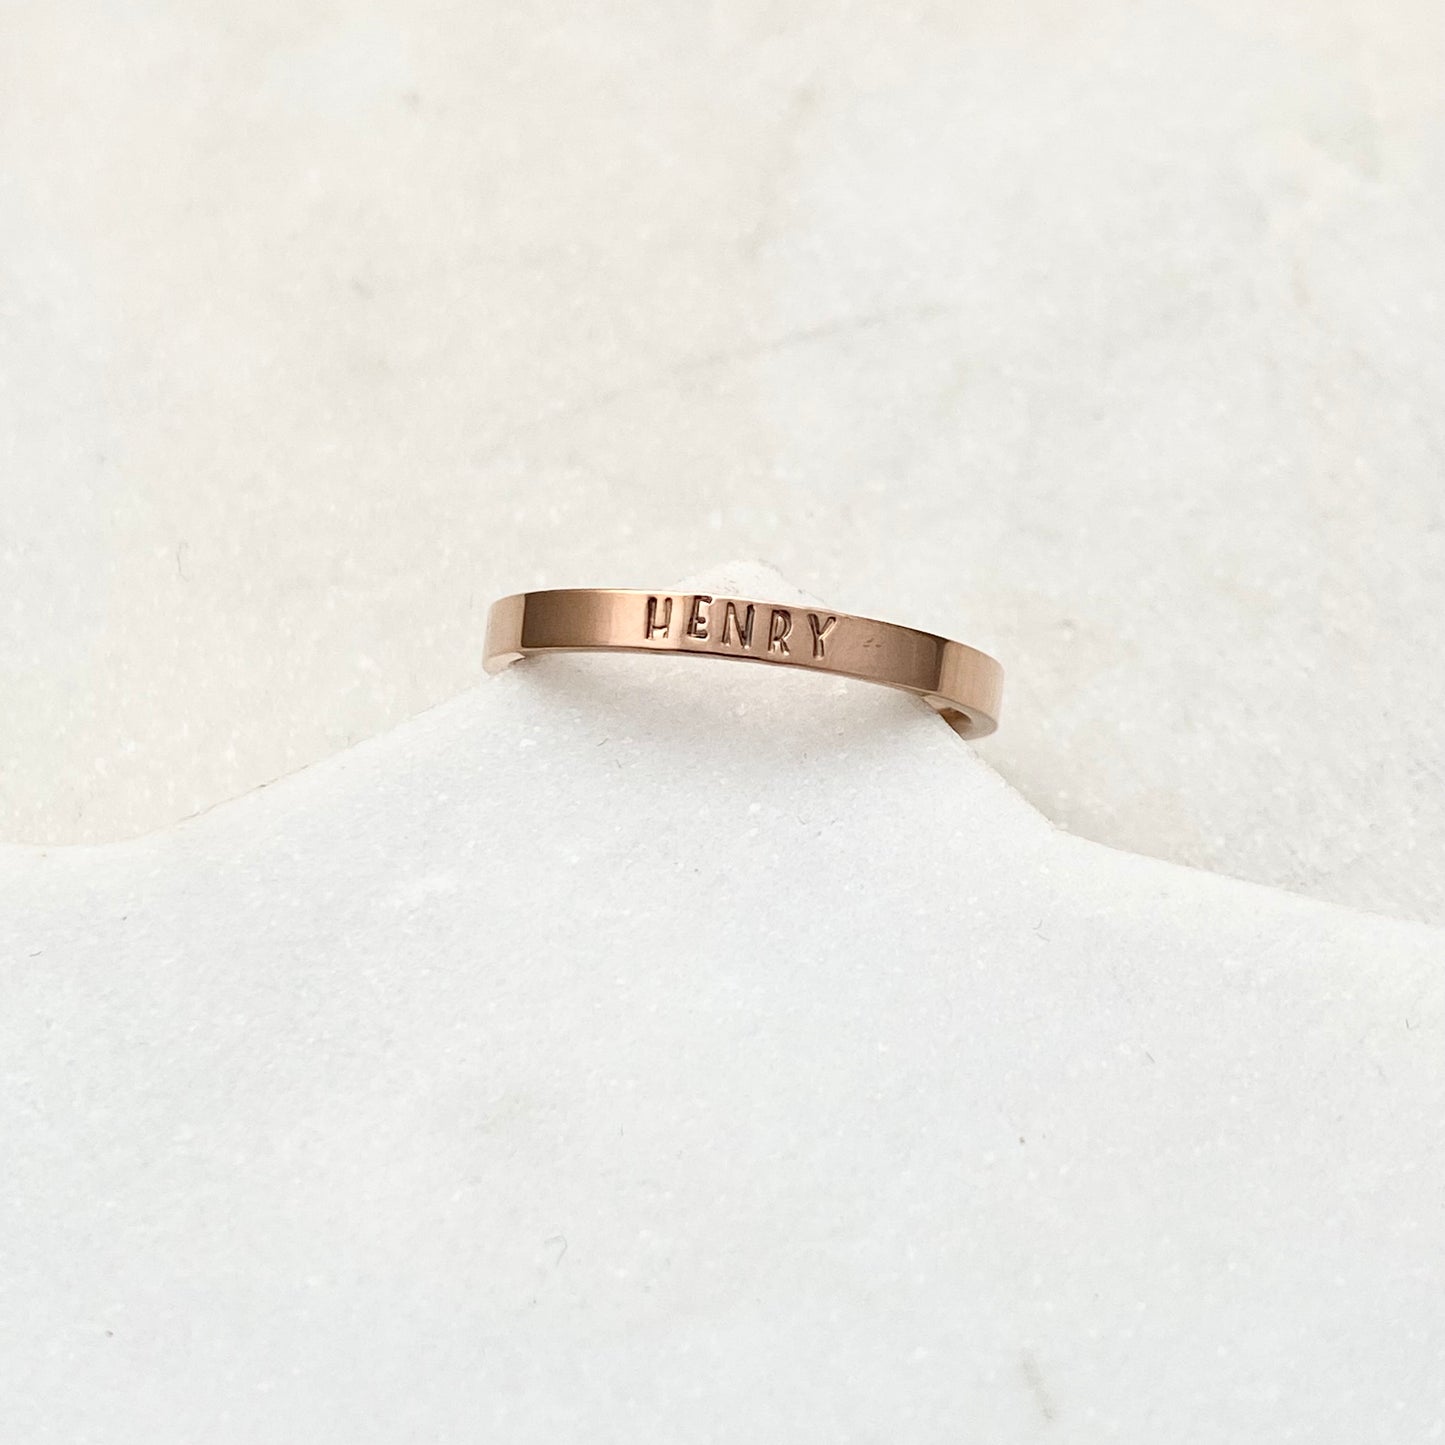 Henry, Size 8, Rose Gold Mini Stacking Ring, Stainless Steel Jewelry, Minimalist Rings, Waterproof Jewelry, Dainty Ring, Stacking Ring Set Rings callistafaye   